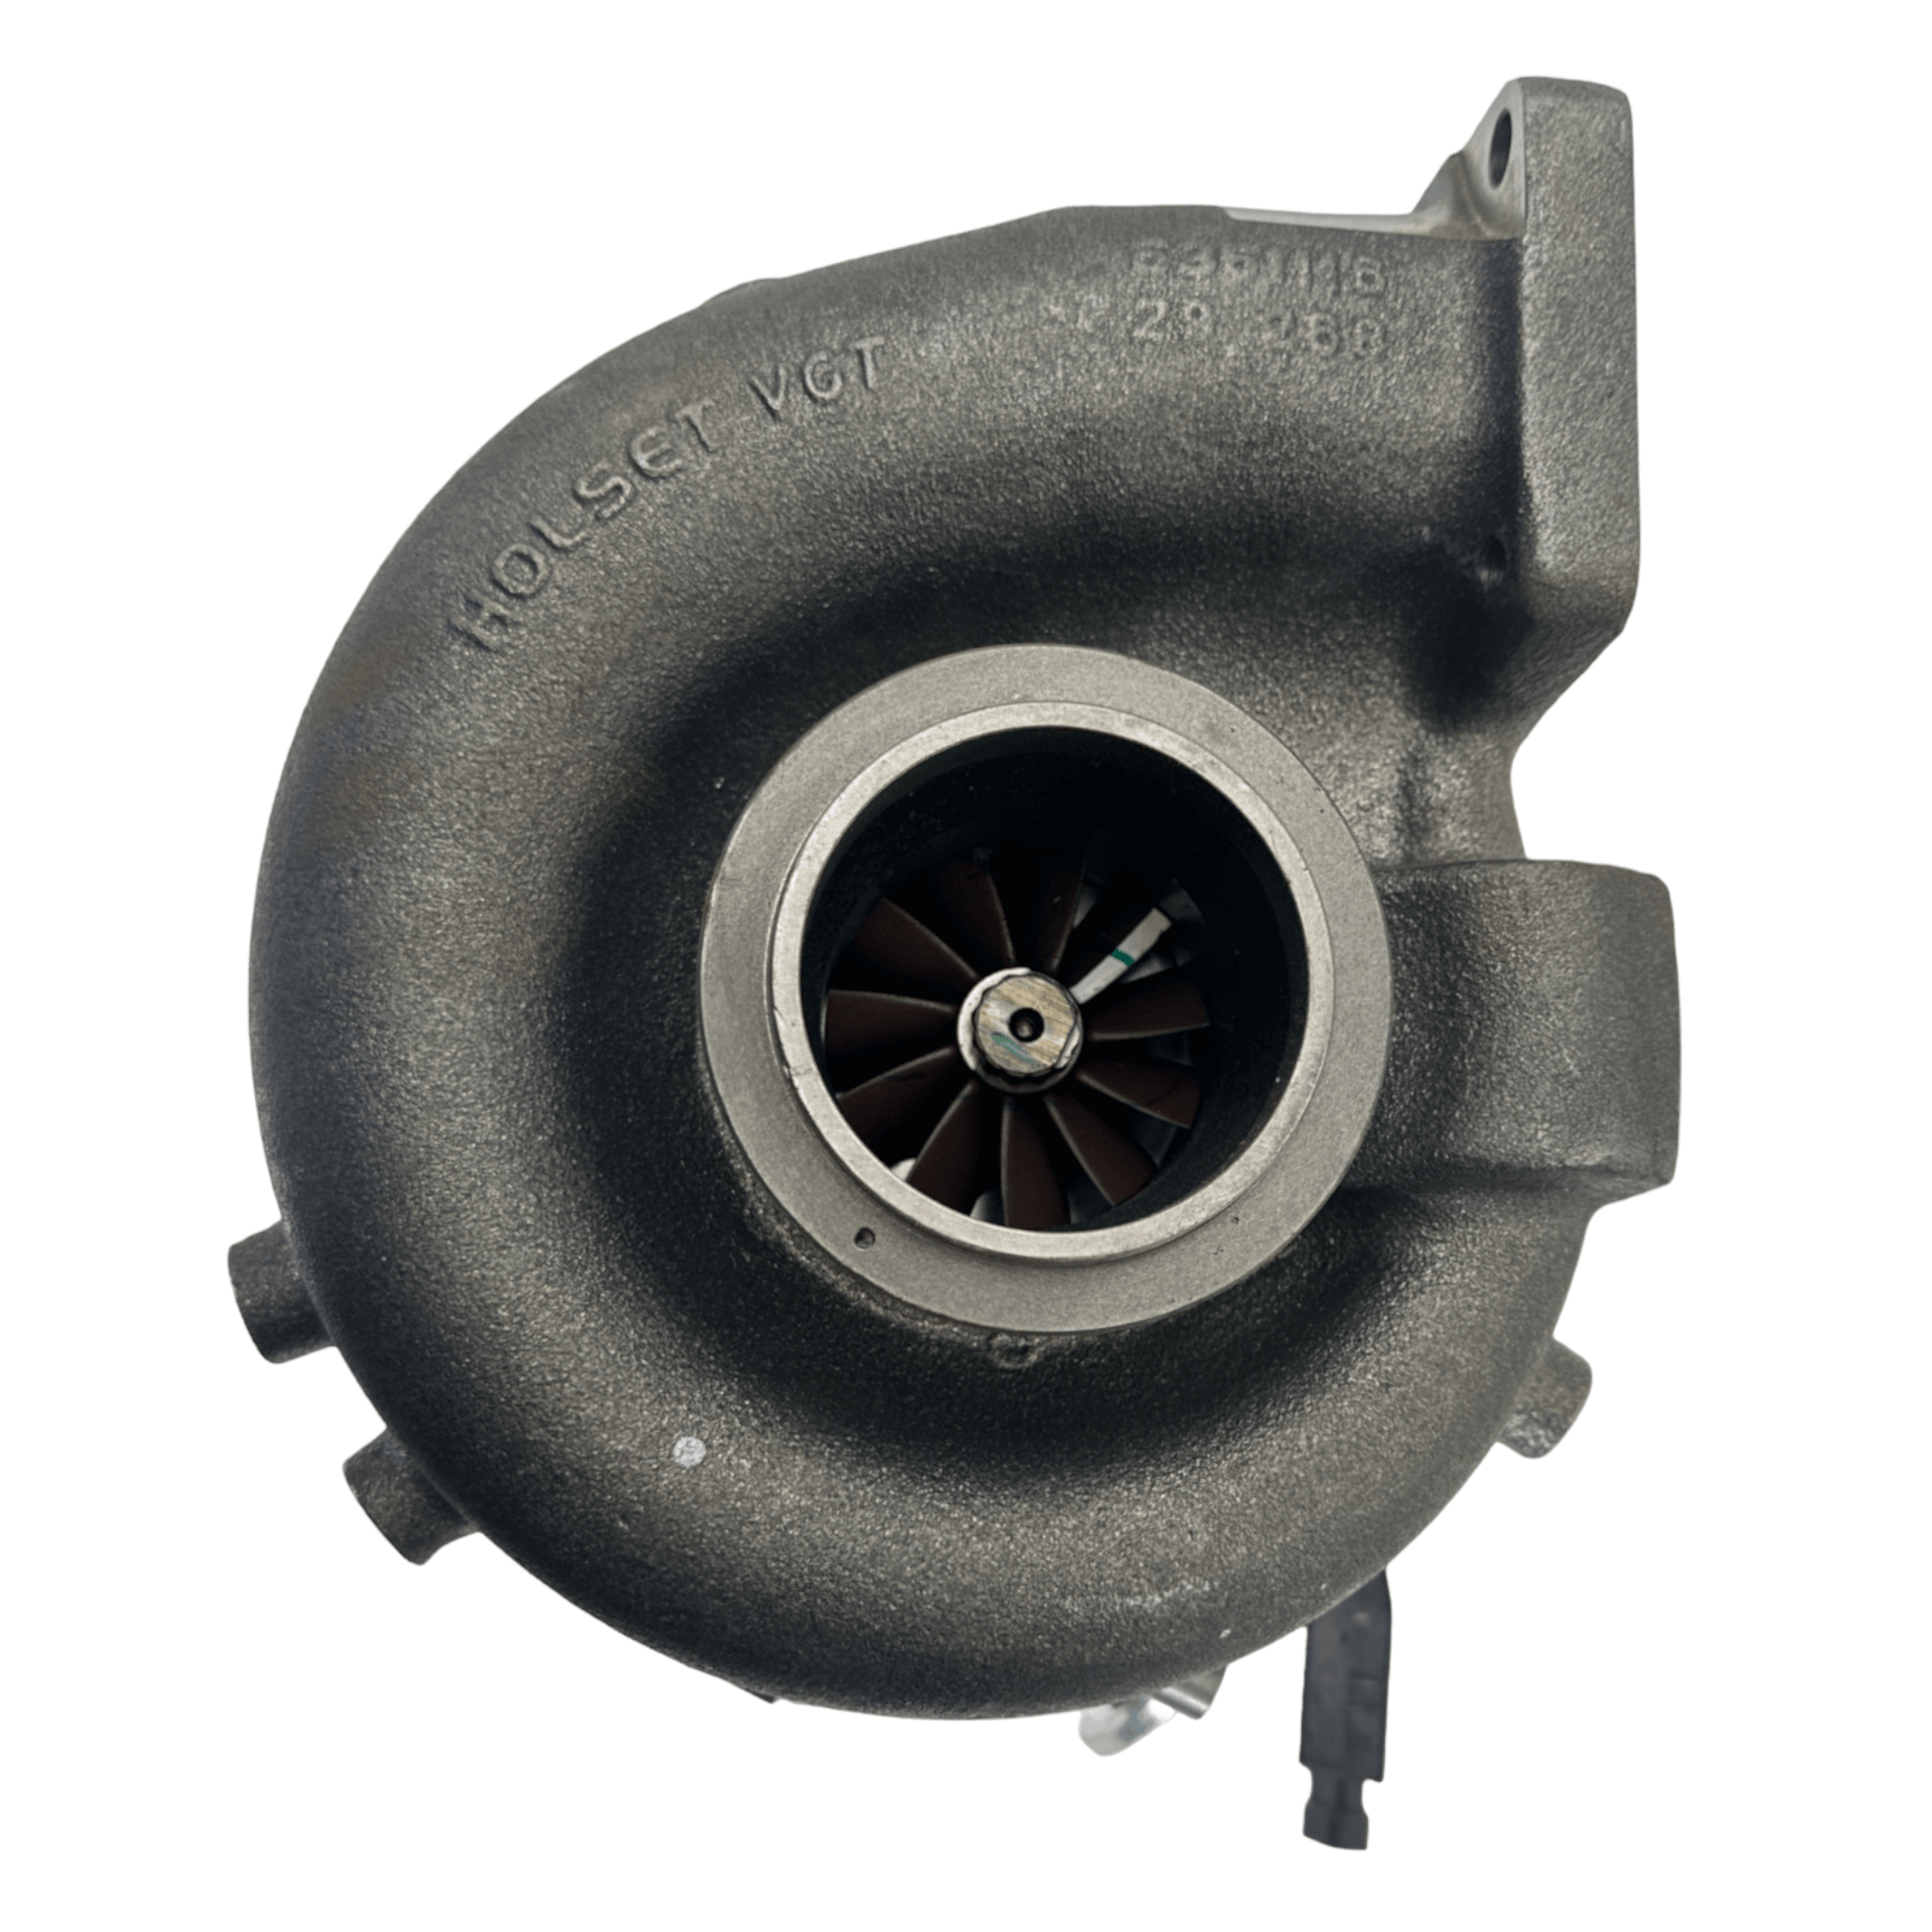 5358484 Genuine Cummins Turbocharger For Isx Isx3